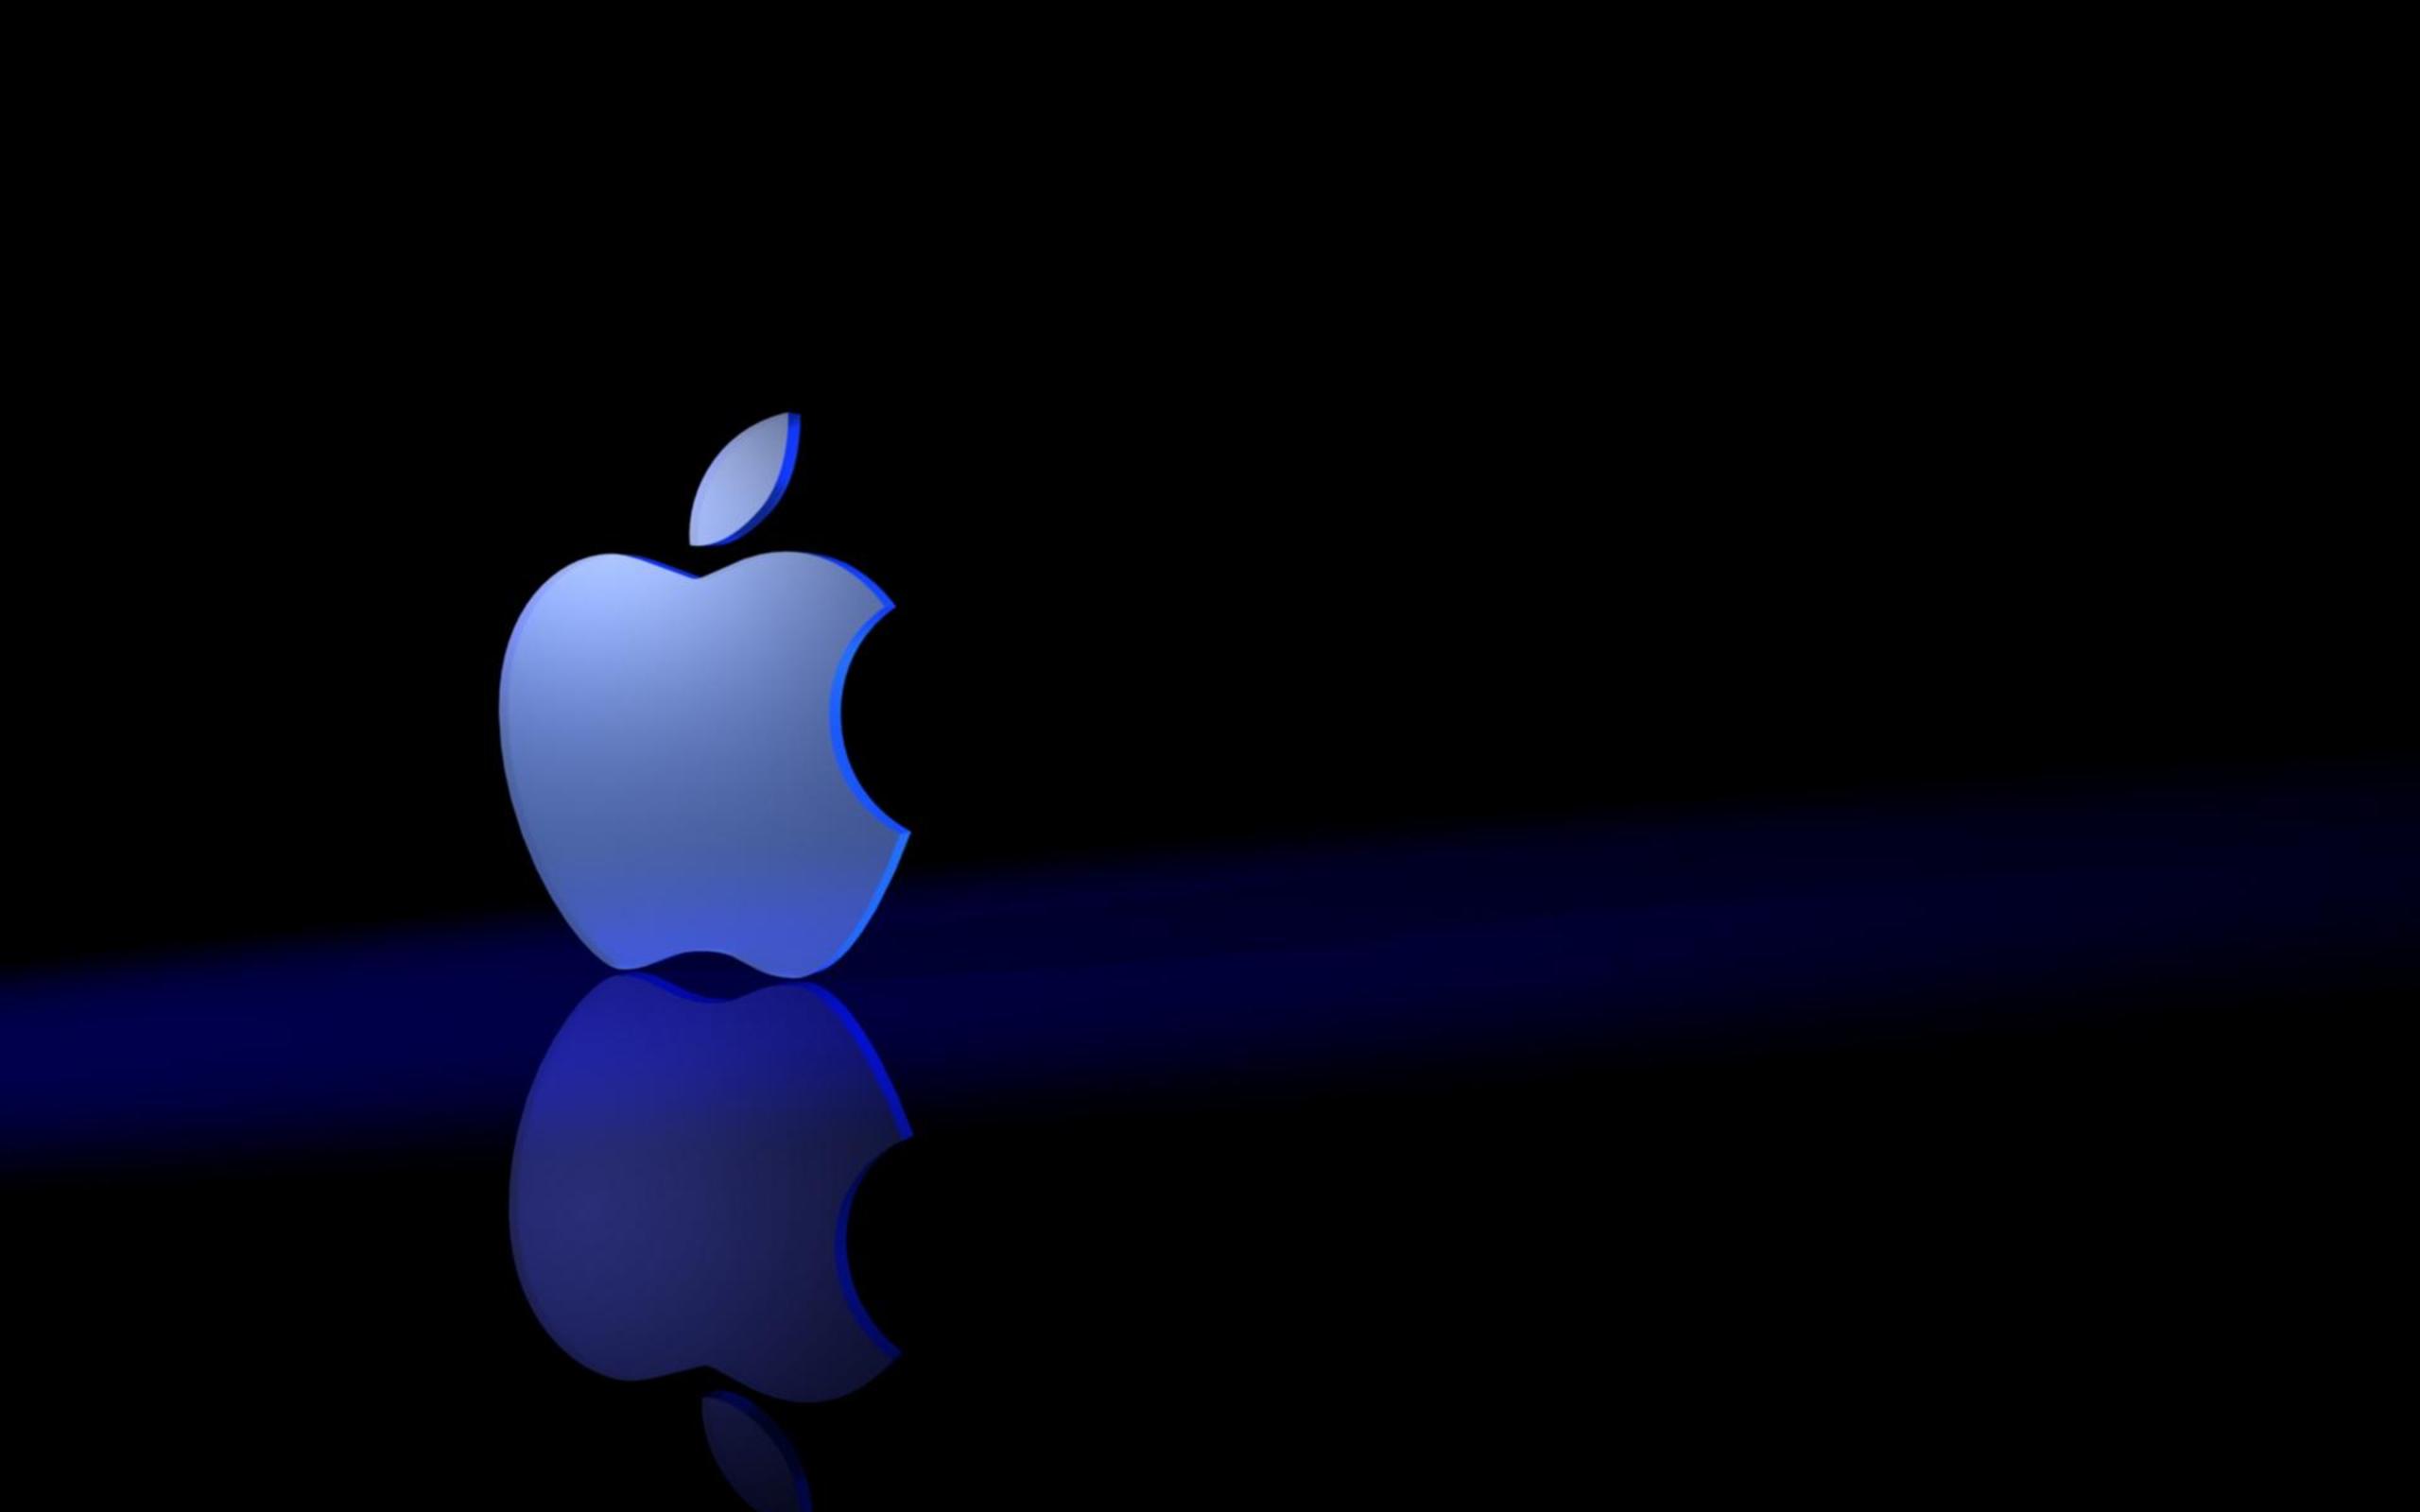 Free Download Apple Mac 2560x1600 For Your Desktop Mobile Tablet Explore 77 Wallpapers For Mac Free Wallpaper For Mac Best Wallpapers For Mac Macbook Wallpapers